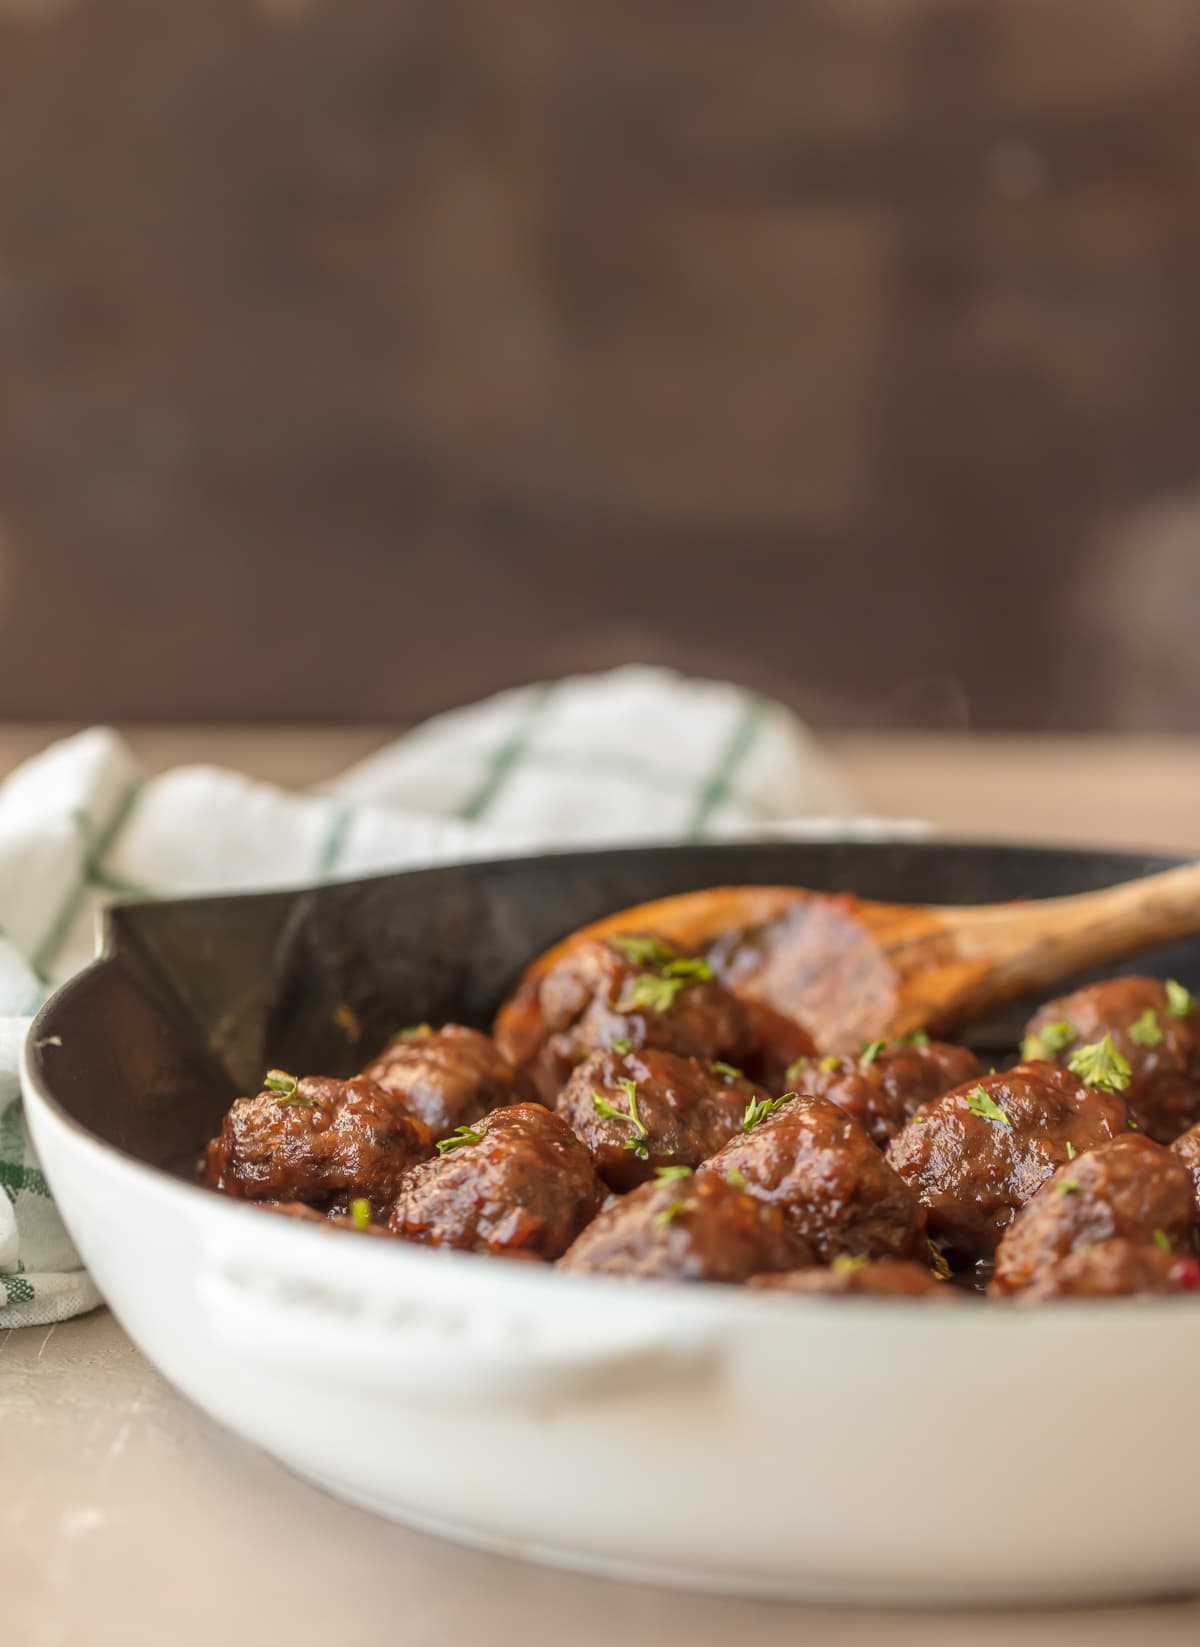 Cranberry sauce meatballs in a skillet